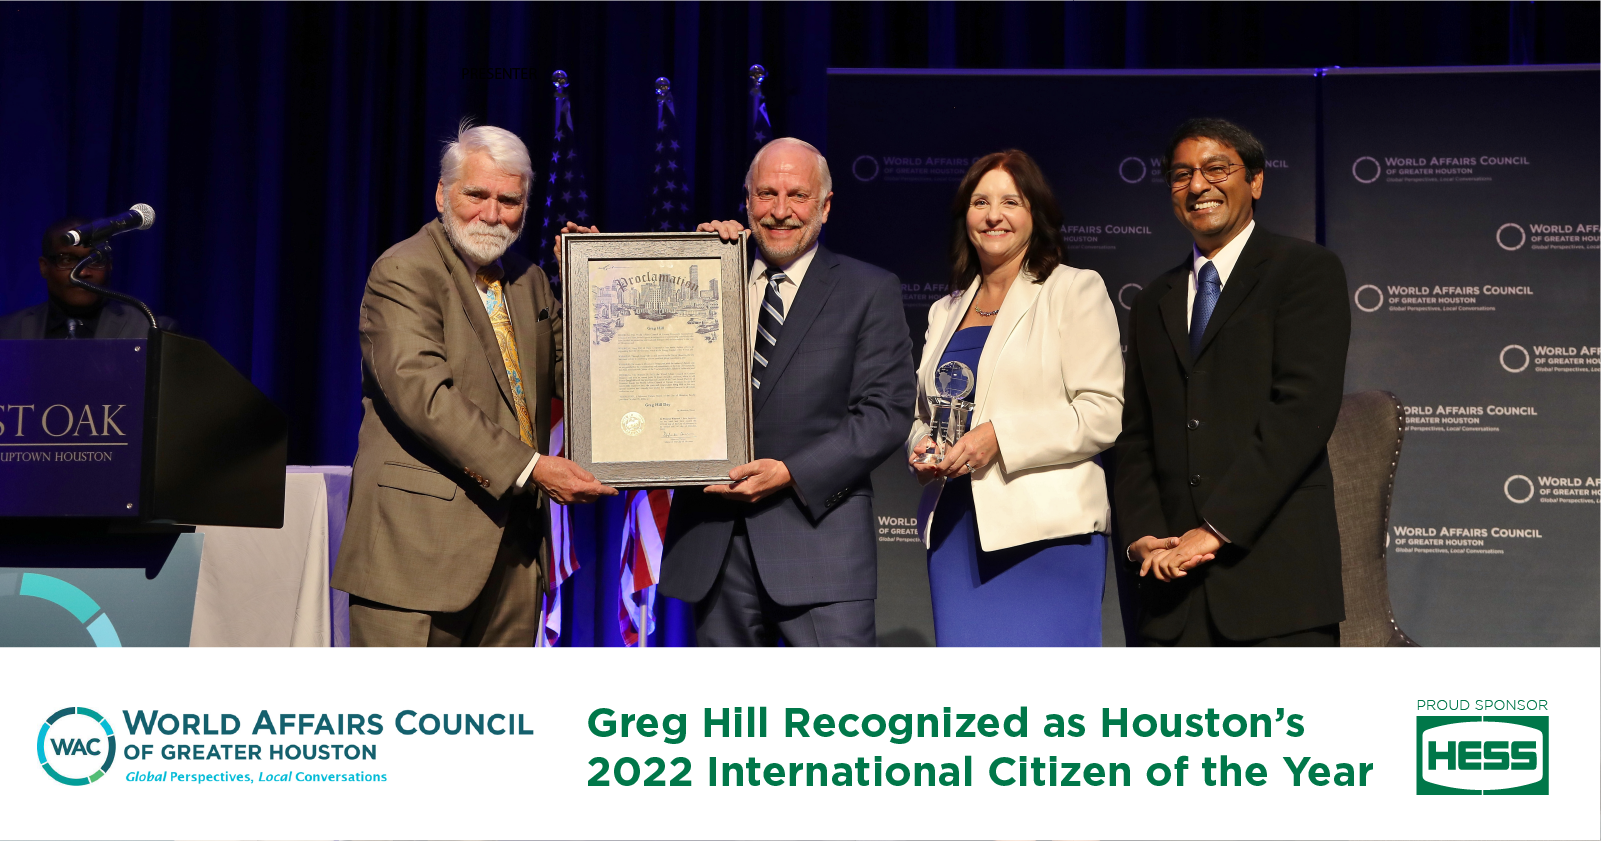 Greg Hill Recognized as 2022 International Citizen of the Year